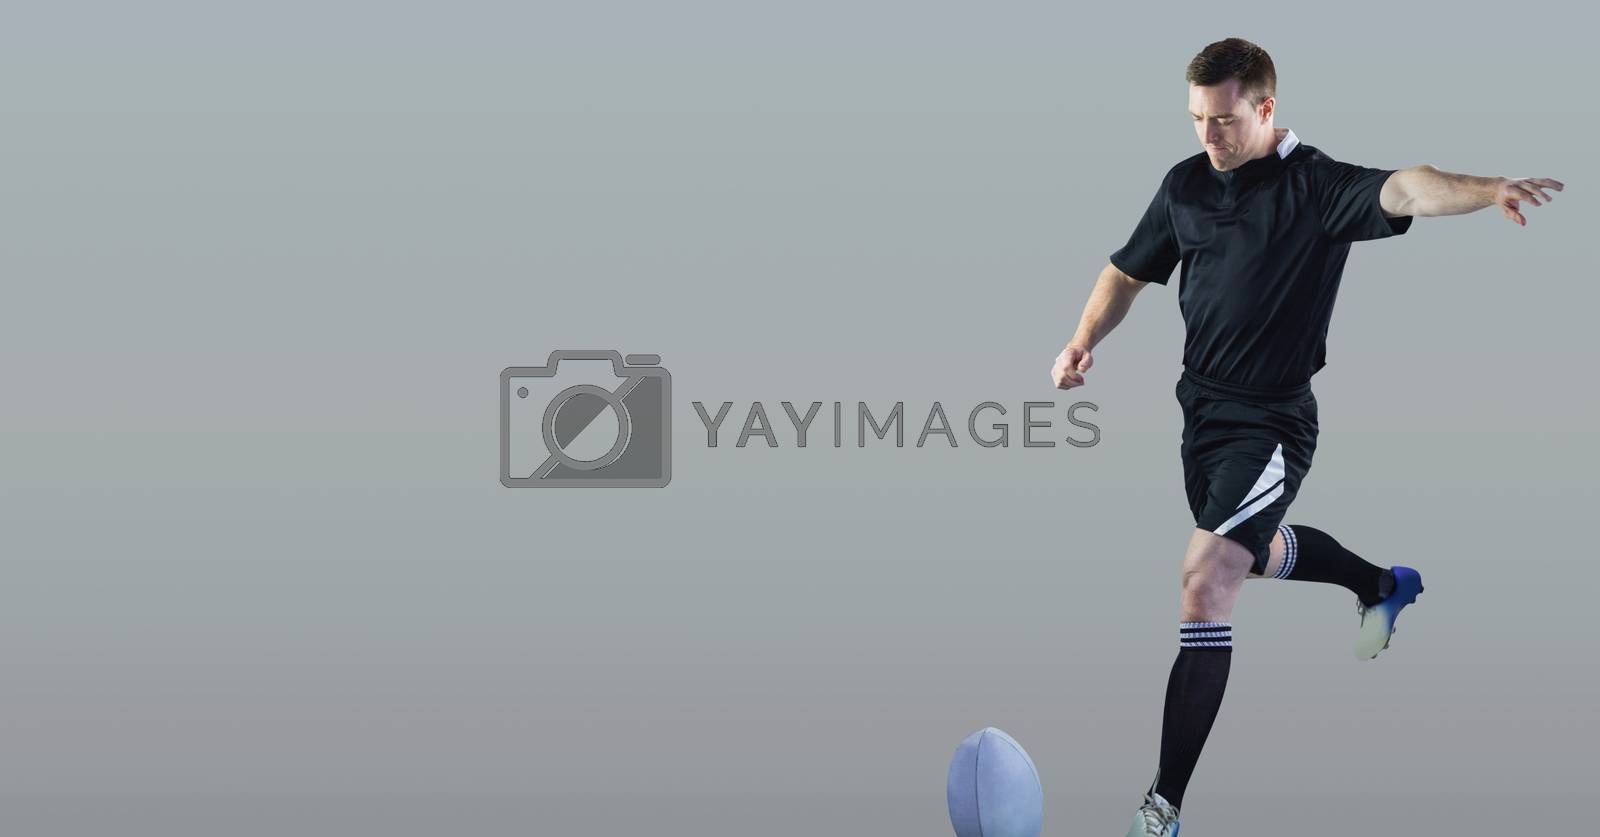 Royalty free image of Rugby player with blank grey background by Wavebreakmedia